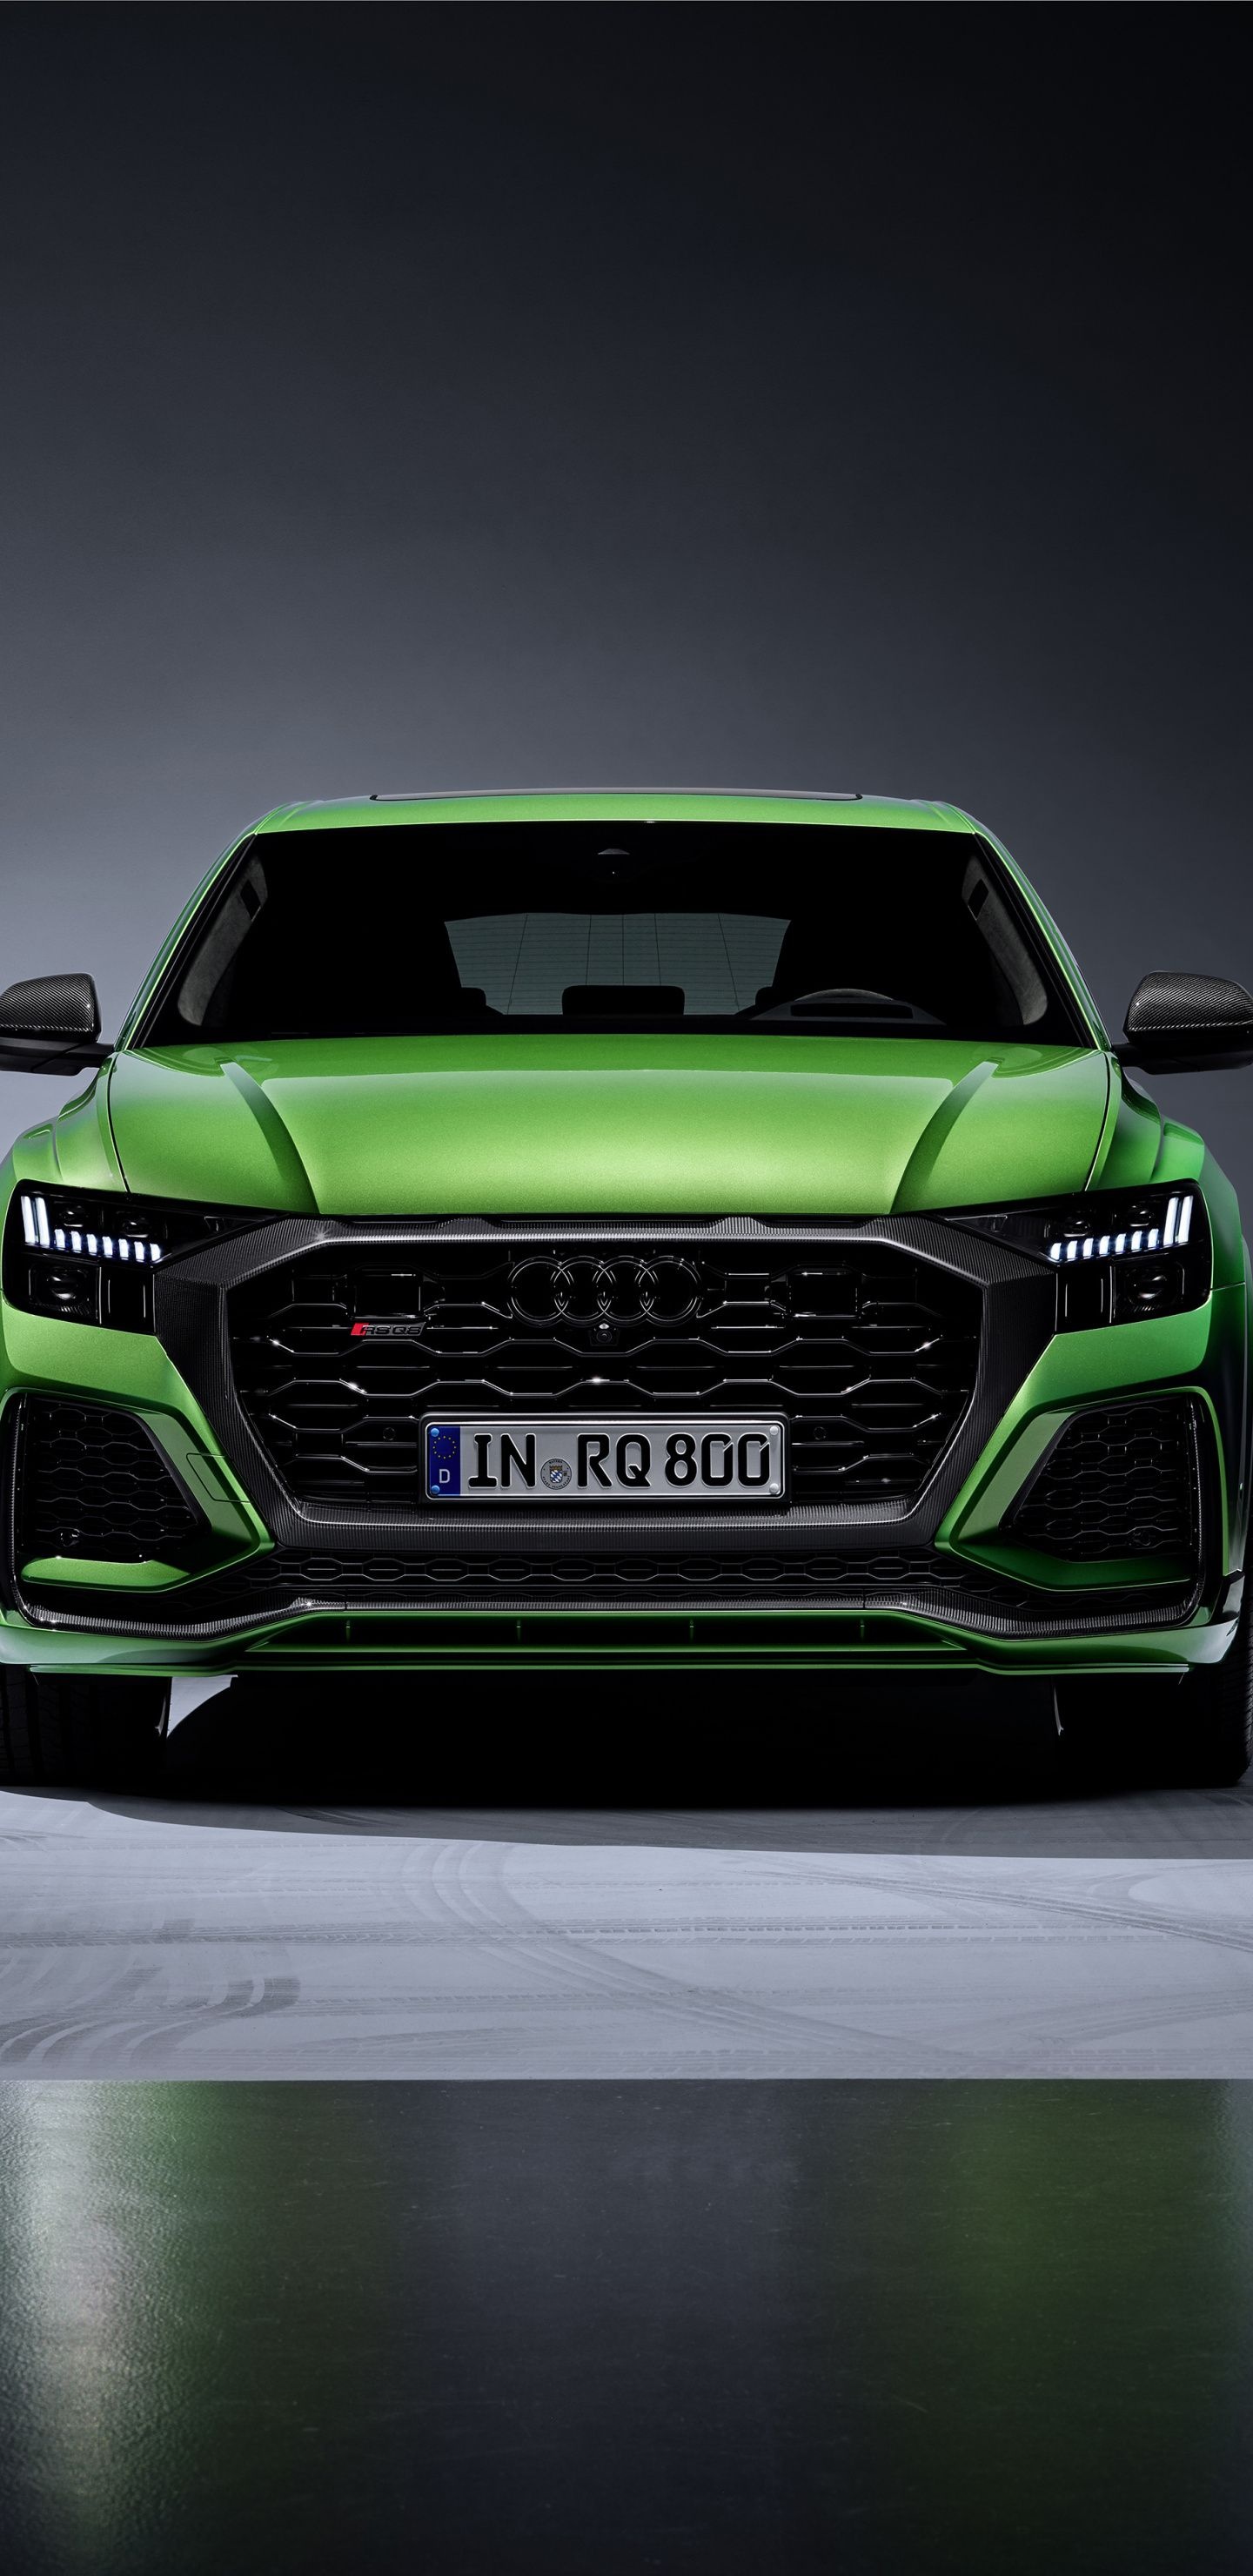 Audi Q8, Front view of luxury, Performance and refinement, Exquisite details, 1440x2960 HD Phone